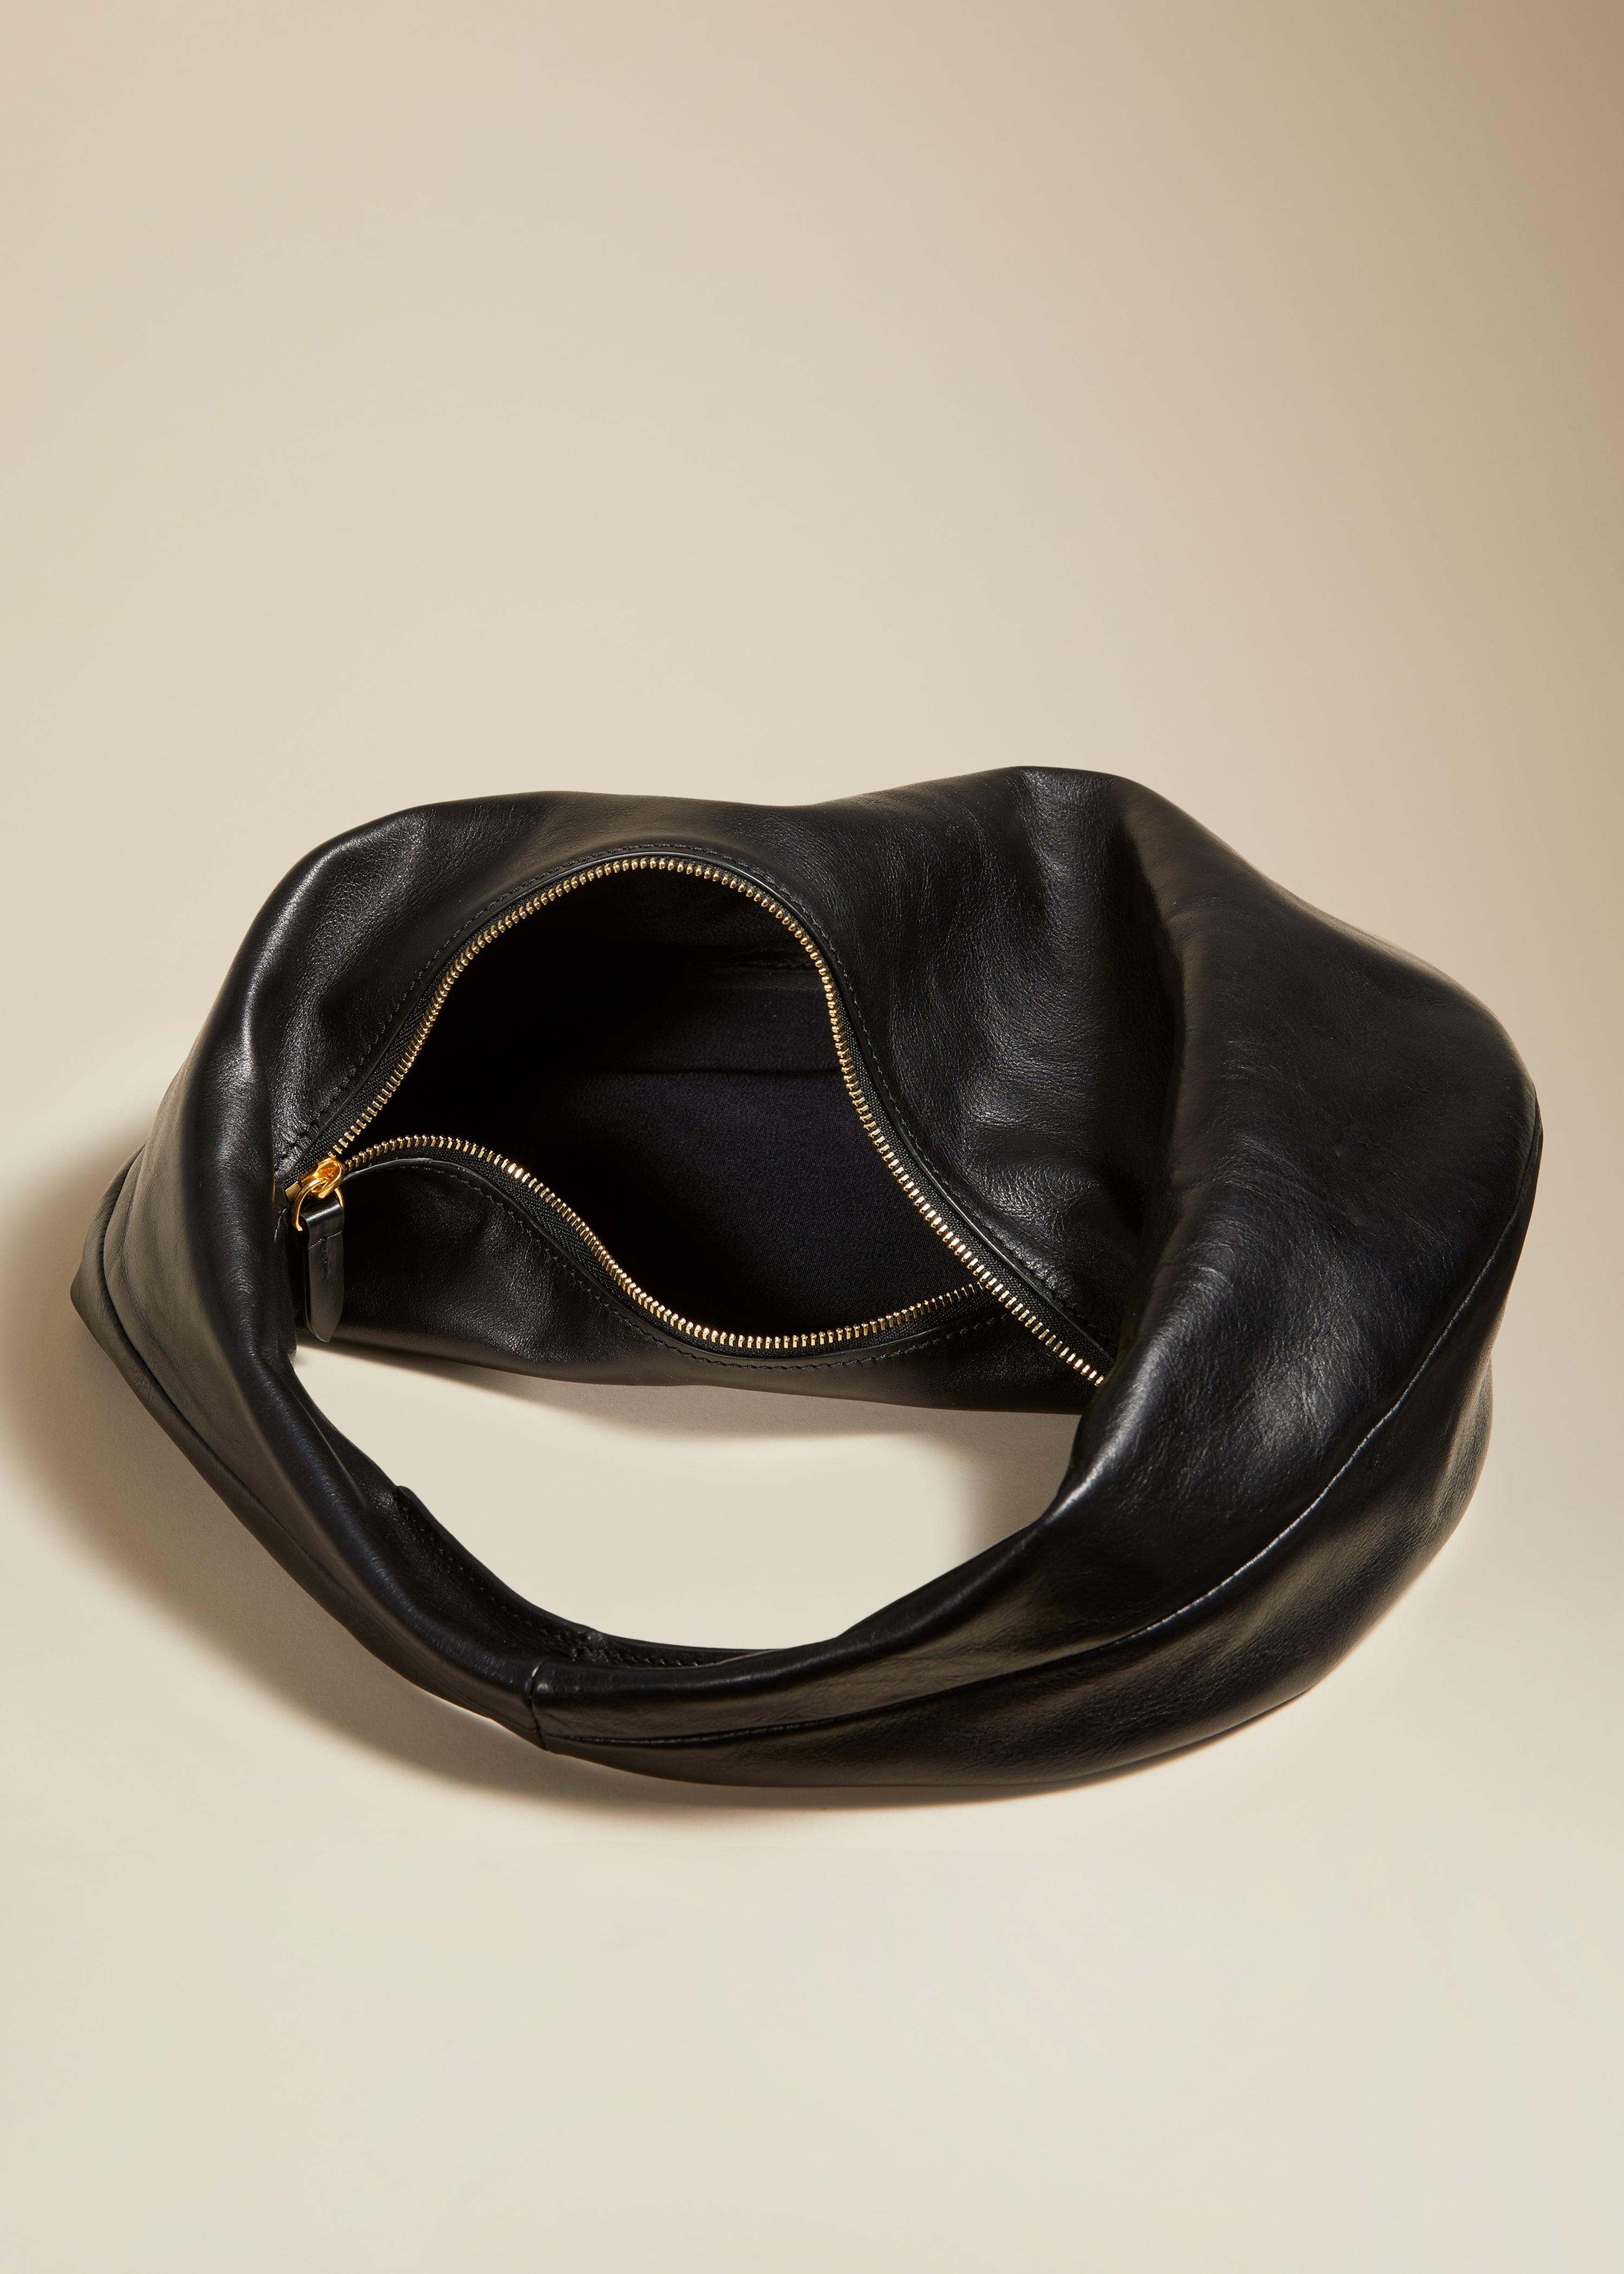 The Medium Olivia Hobo in Black Leather - The Iconic Issue